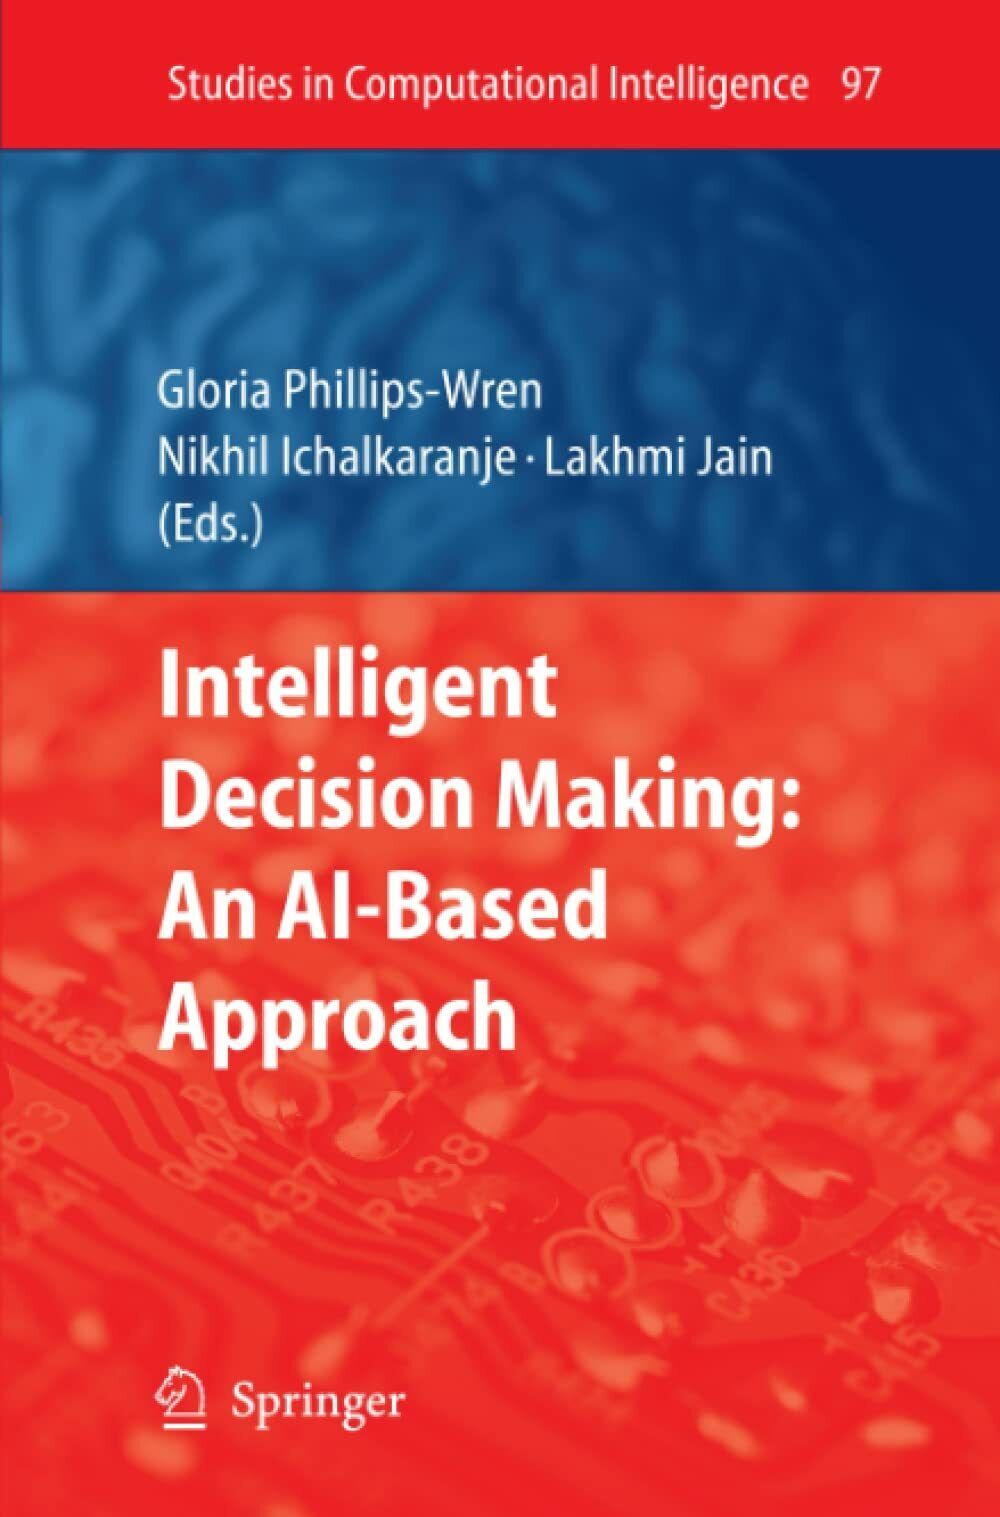 Intelligent Decision Making: An AI-Based Approach - Springer, 2010